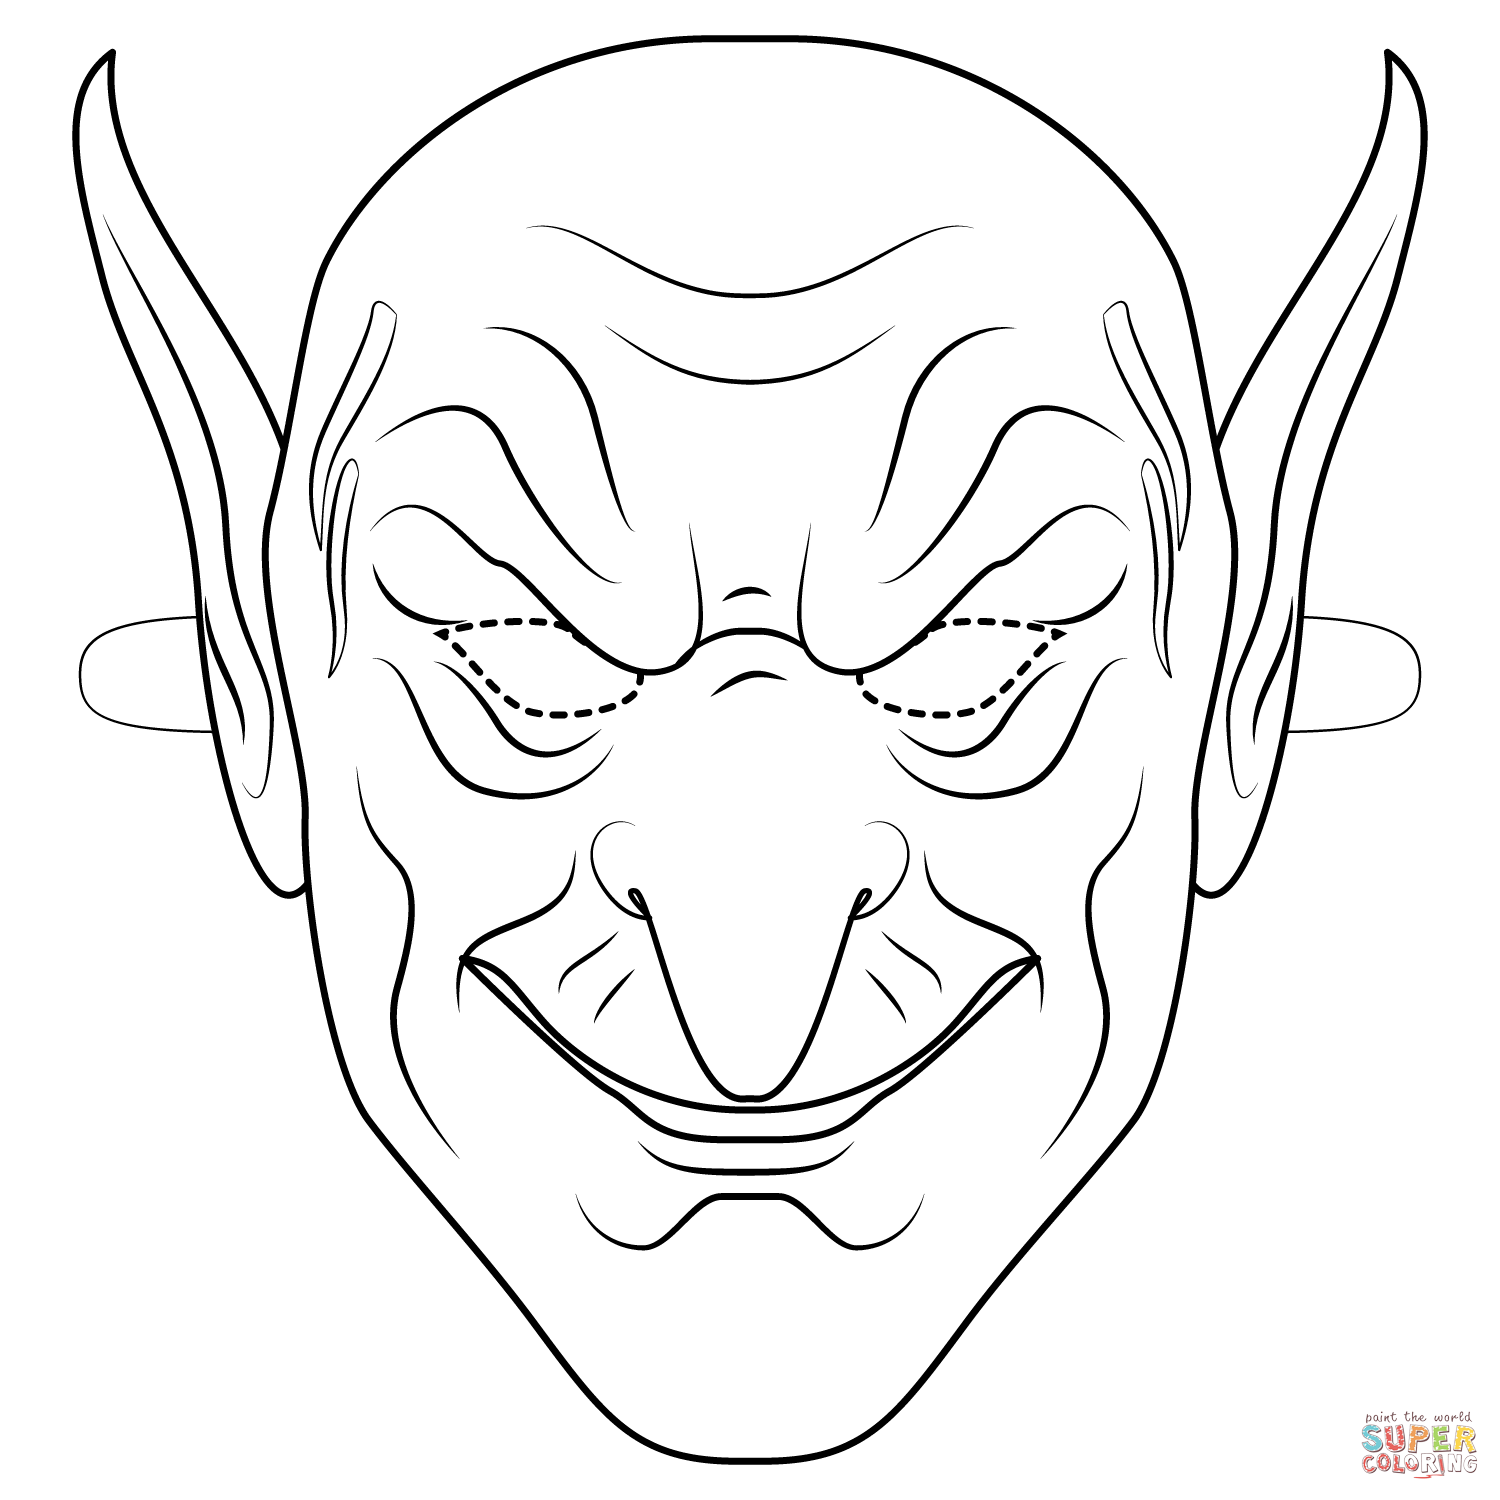 Green goblin mask coloring page free printable coloring pages